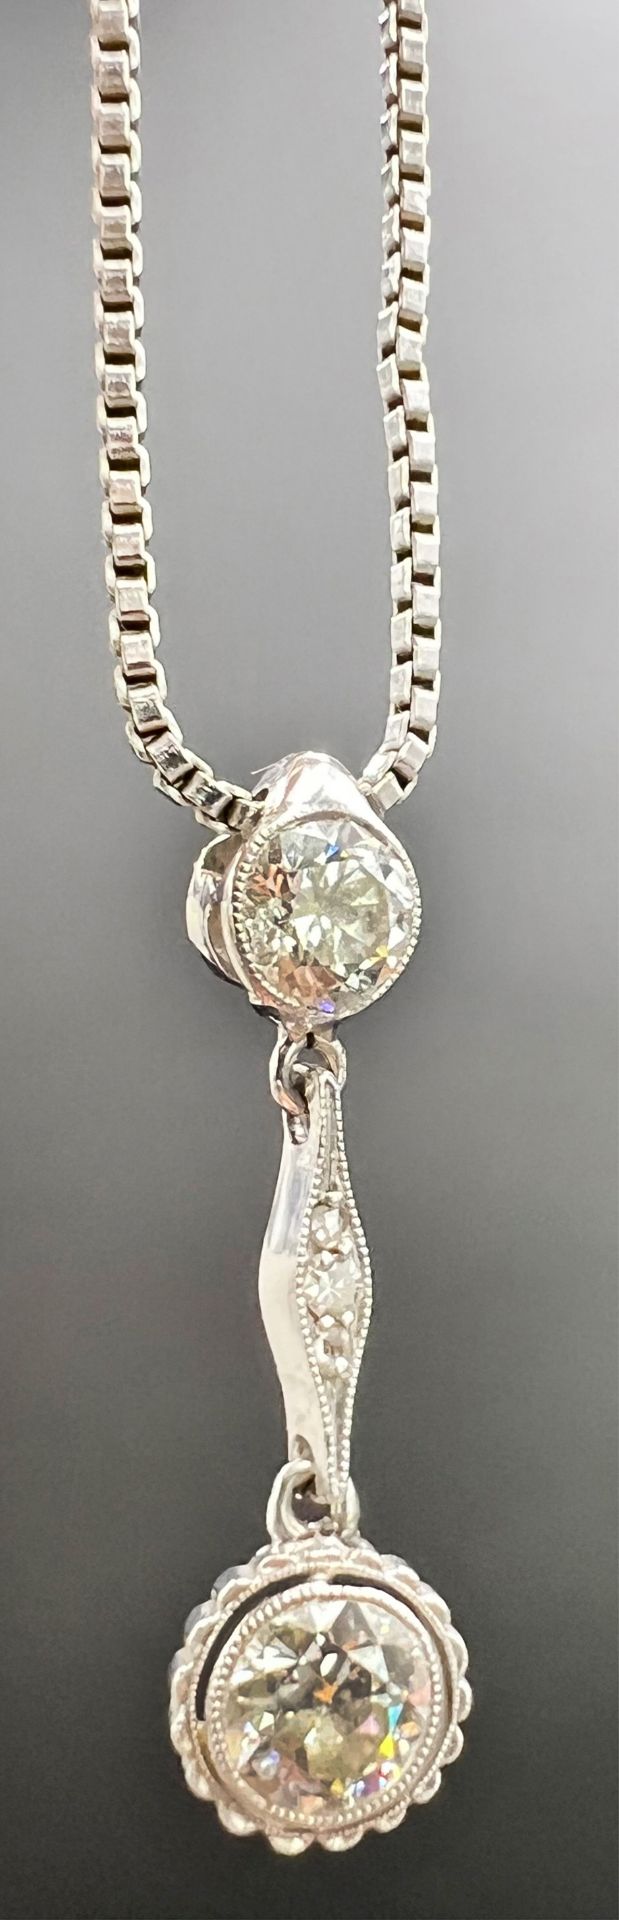 Pendant with chain. 585 white gold with 2 diamonds. Art deco. - Image 2 of 12